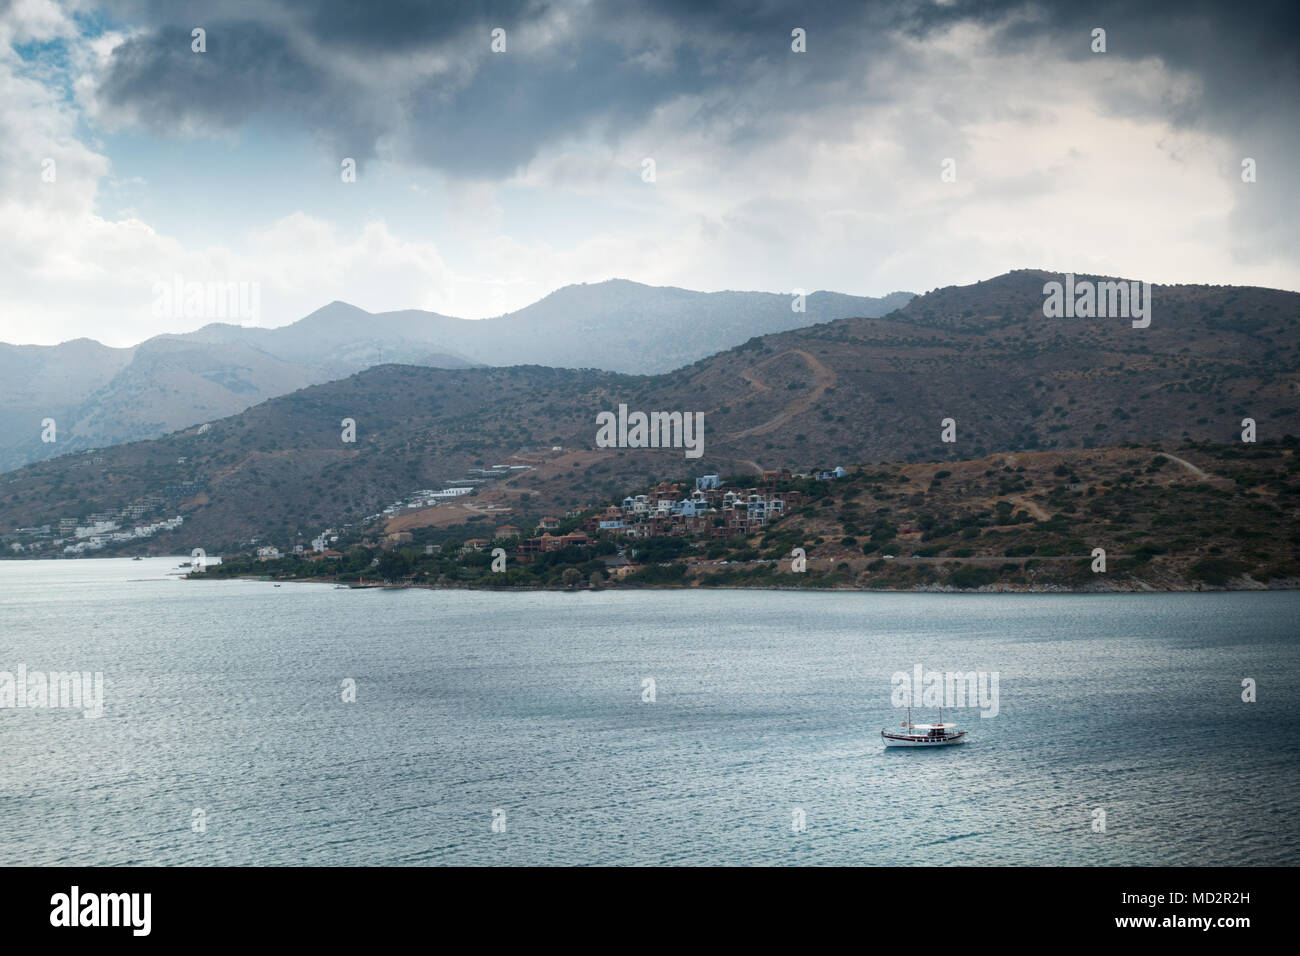 Seascape and mountain against cloudy sky in Crete, Greece Stock Photo